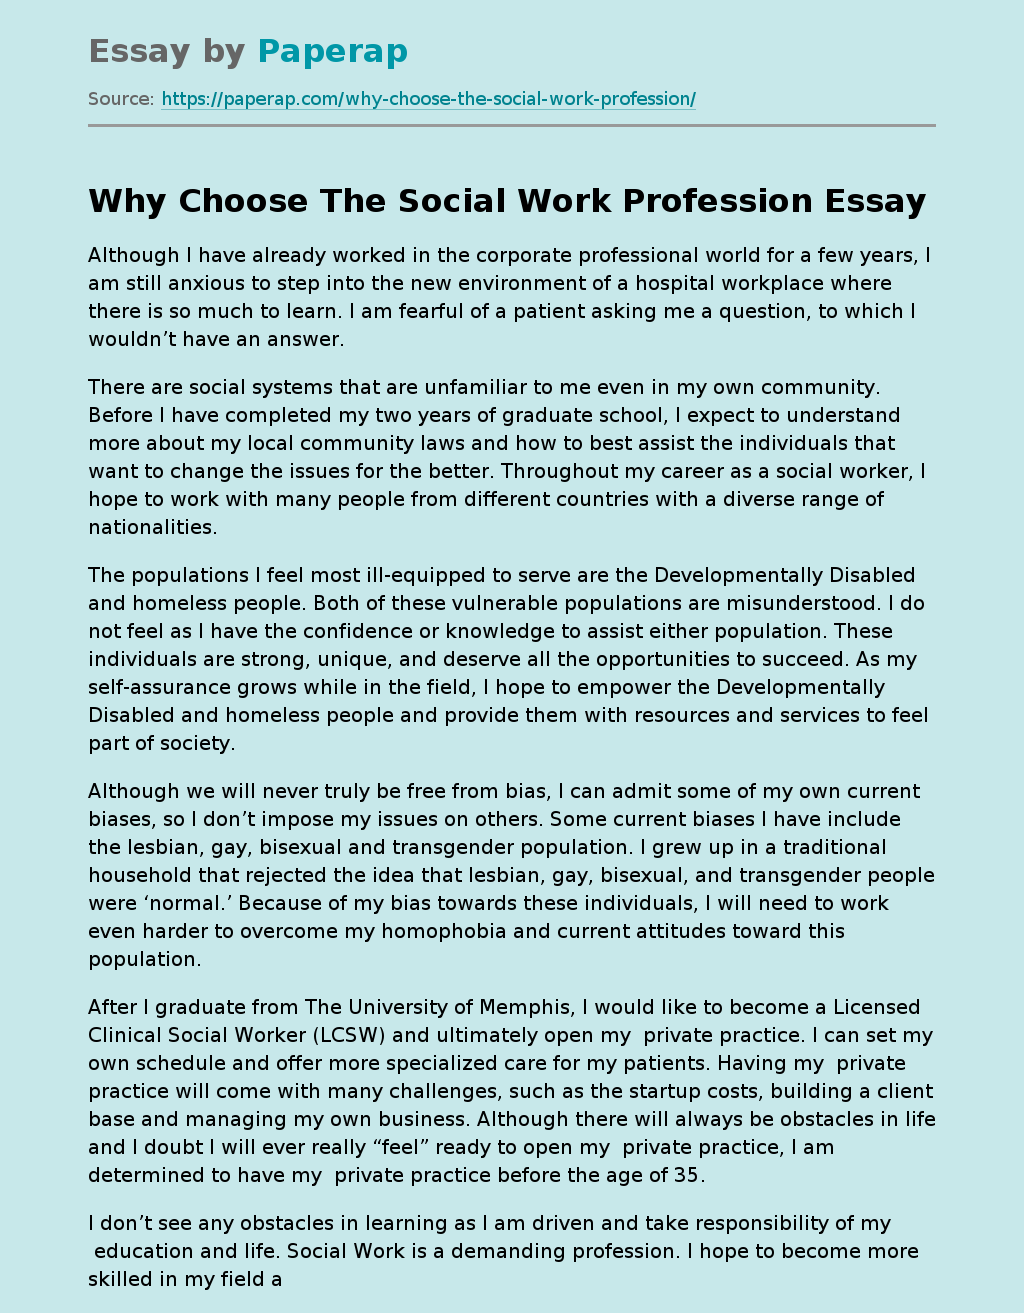 Why Choose The Social Work Profession